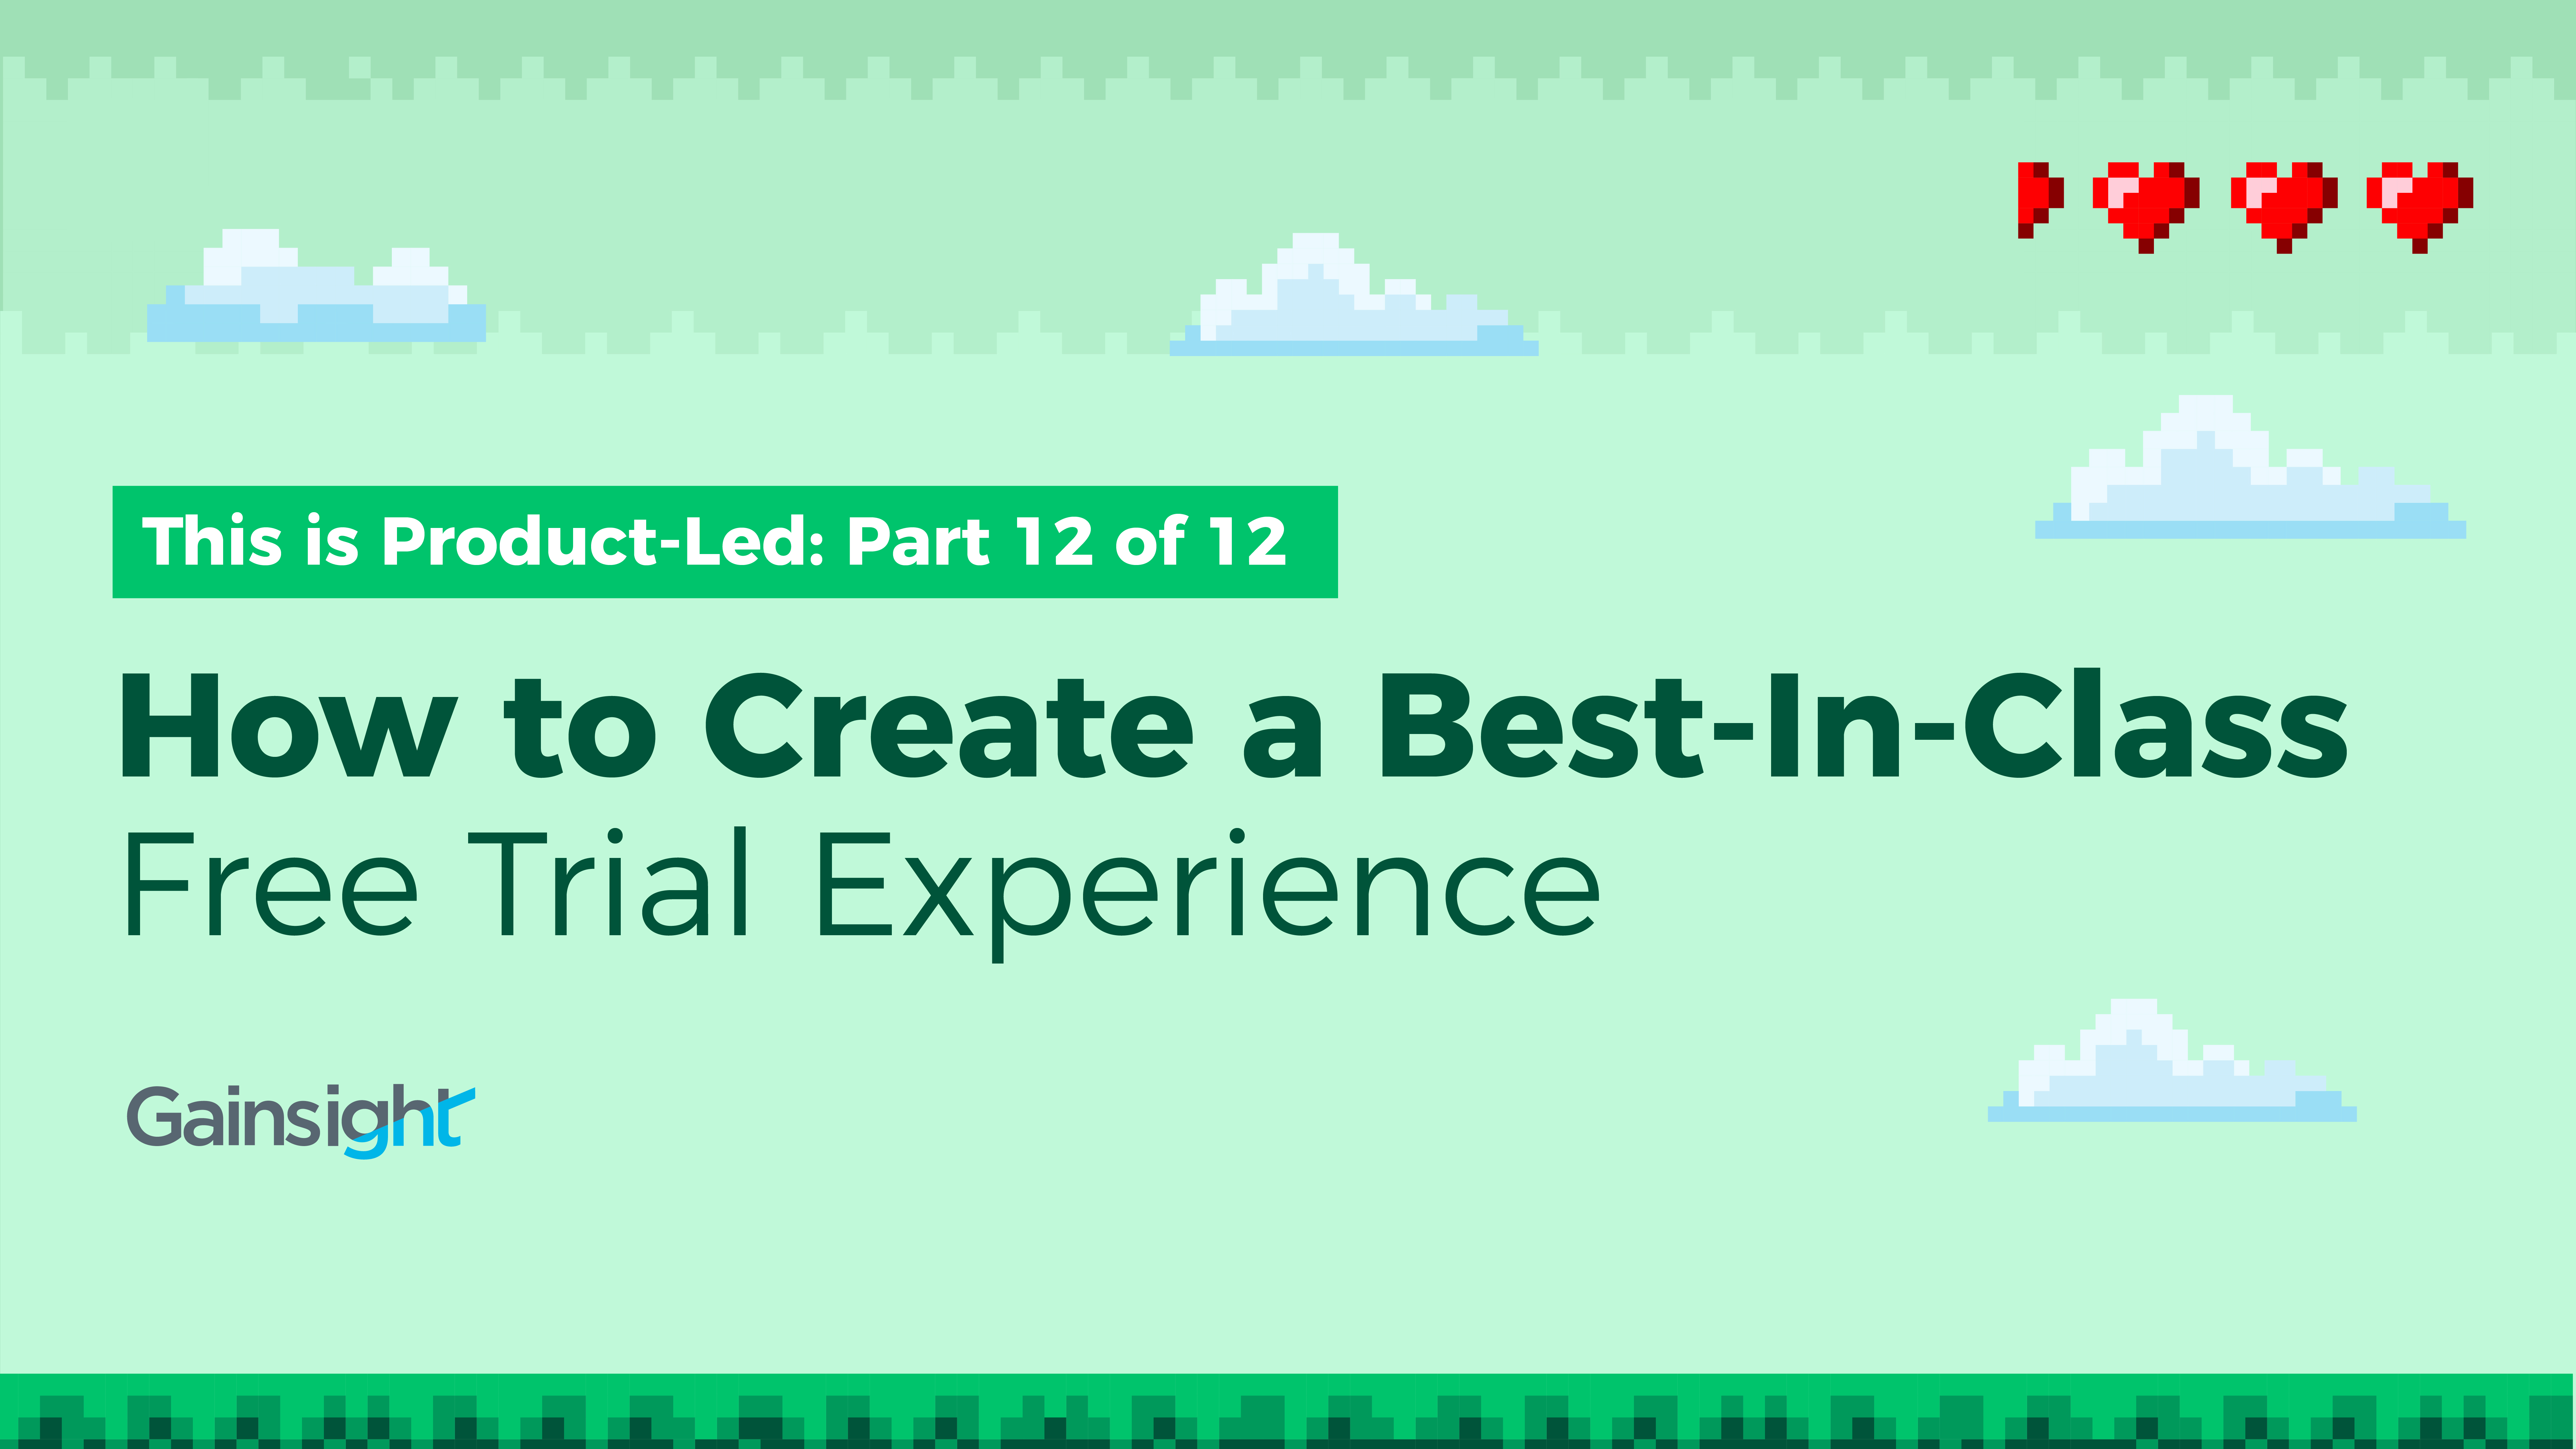 How to Create a Best-In-Class Free Trial Experience Image